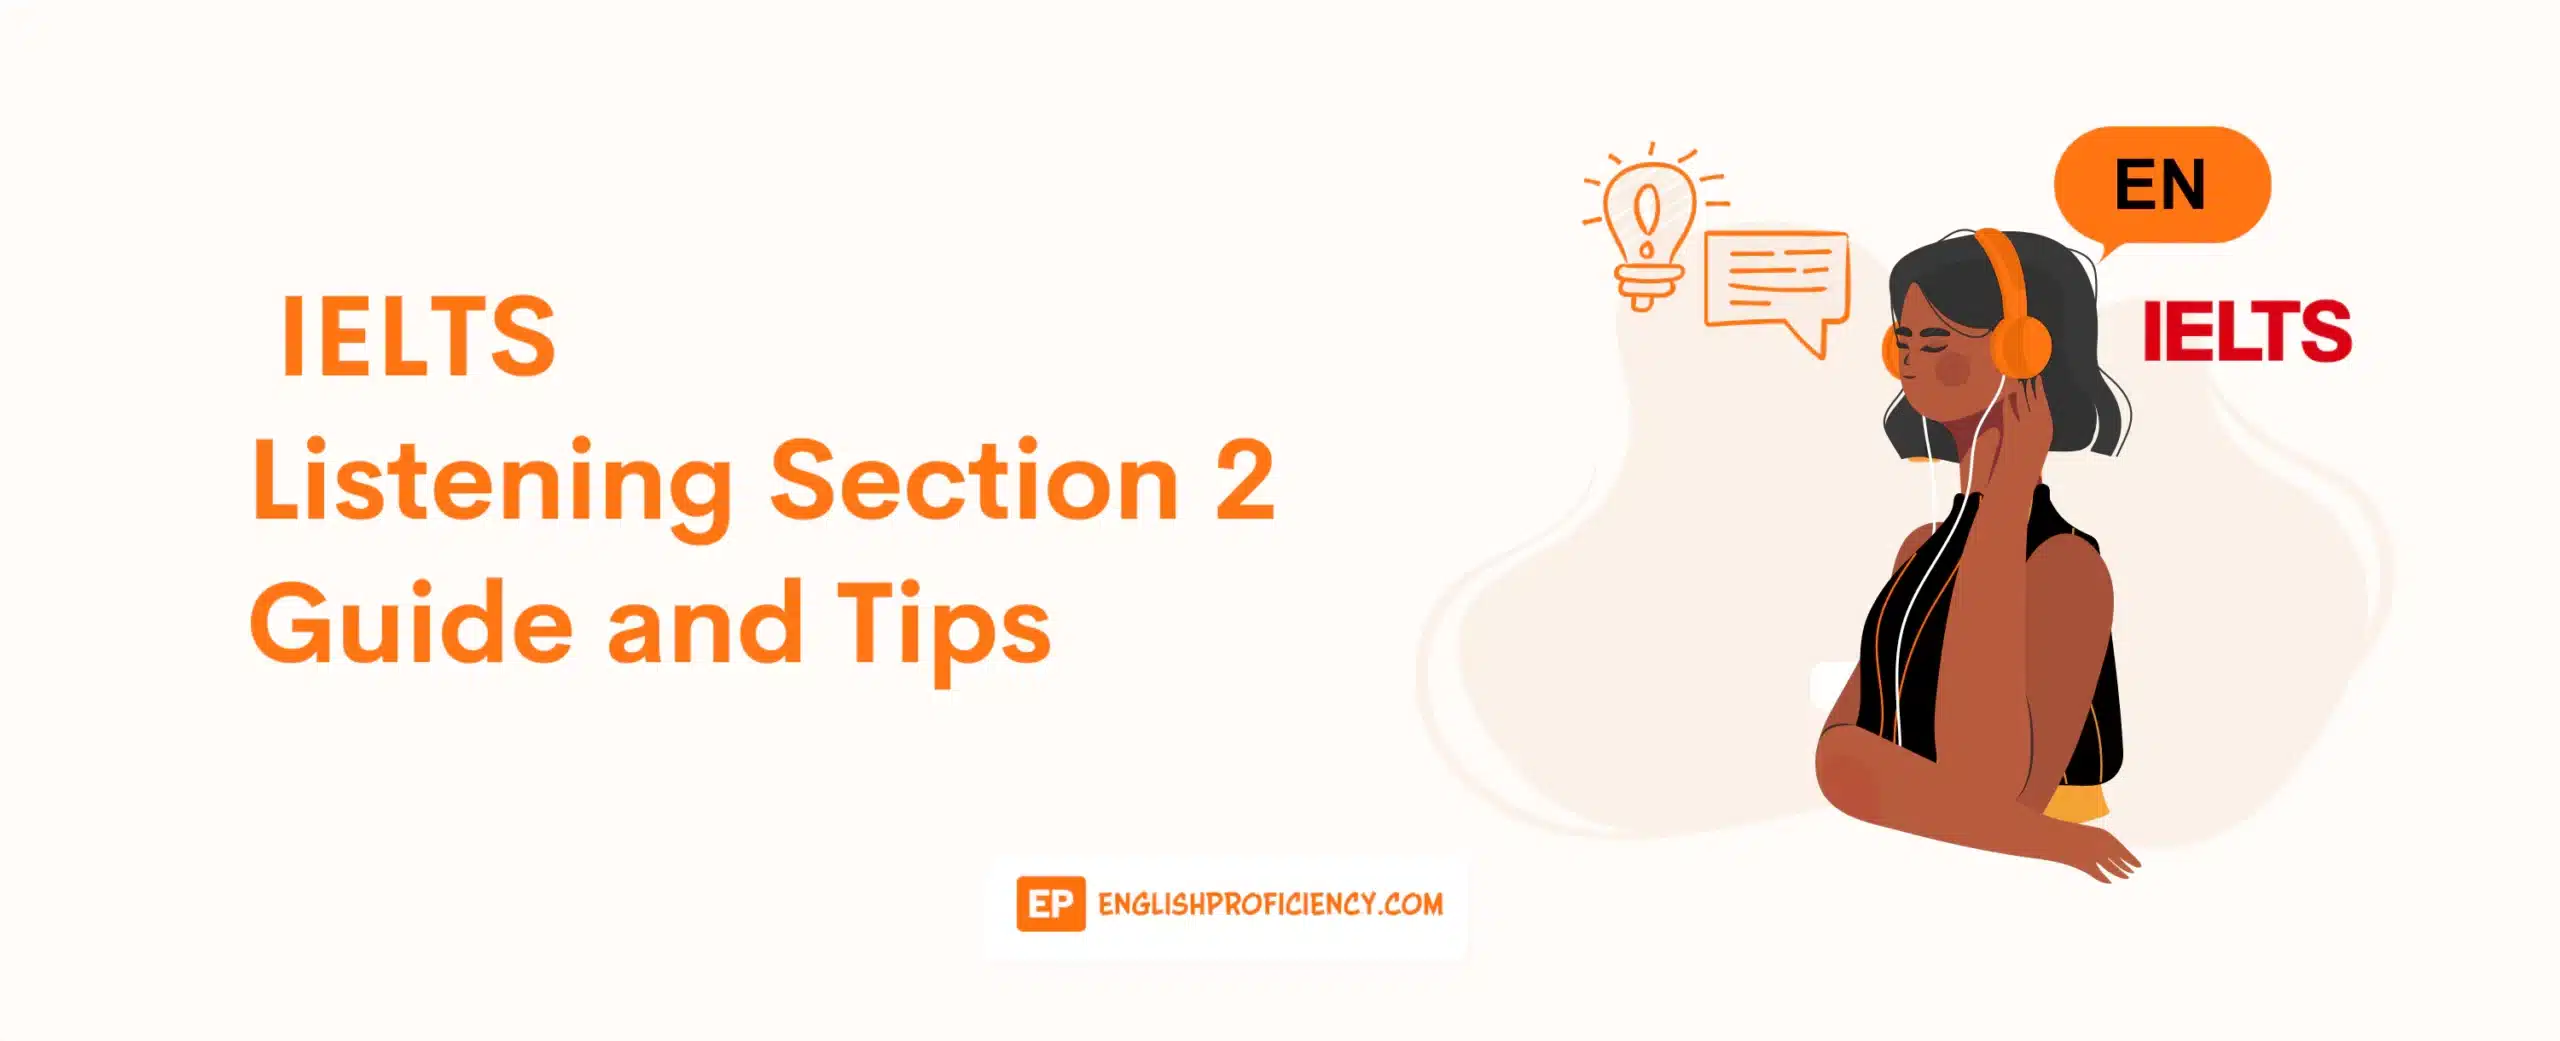 IELTS Listening Section 2 Guide and Tips